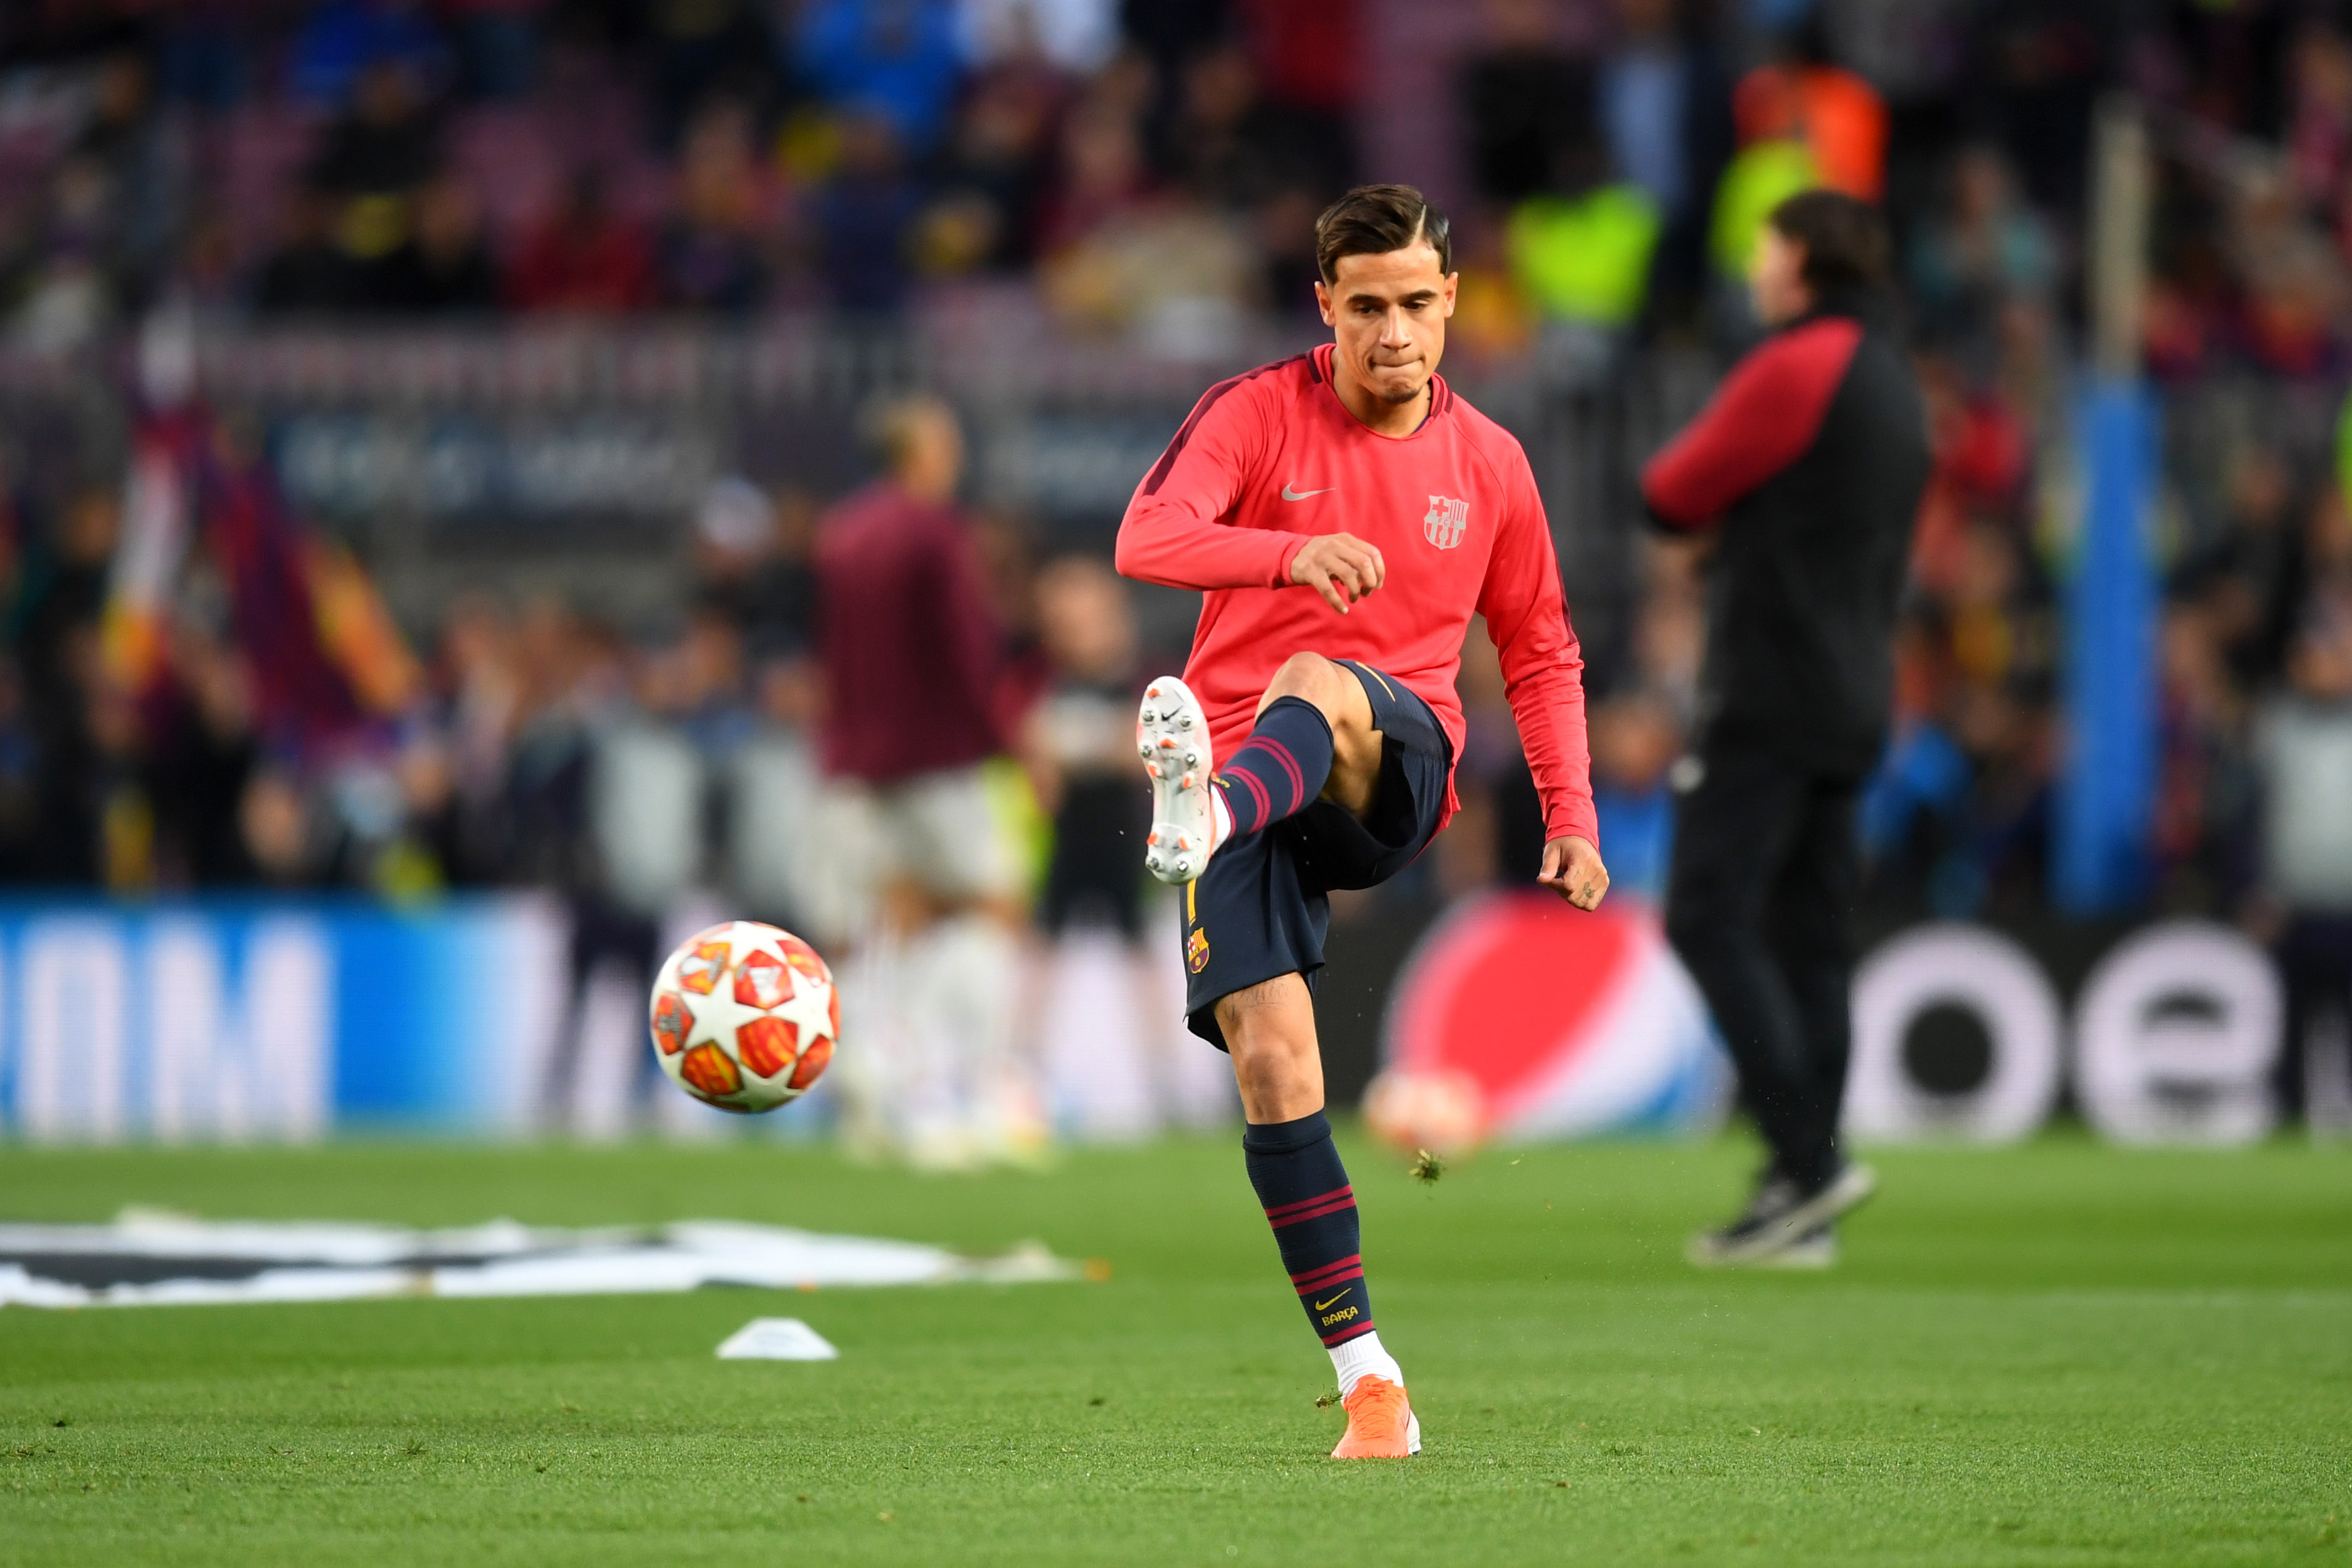 BARCELONA, SPAIN - MAY 01:   Philippe Coutinho of Barcelona warms up ahead of the UEFA Champions League Semi Final first leg match between Barcelona and Liverpool at the Nou Camp on May 01, 2019 in Barcelona, Spain. (Photo by Michael Regan/Getty Images)